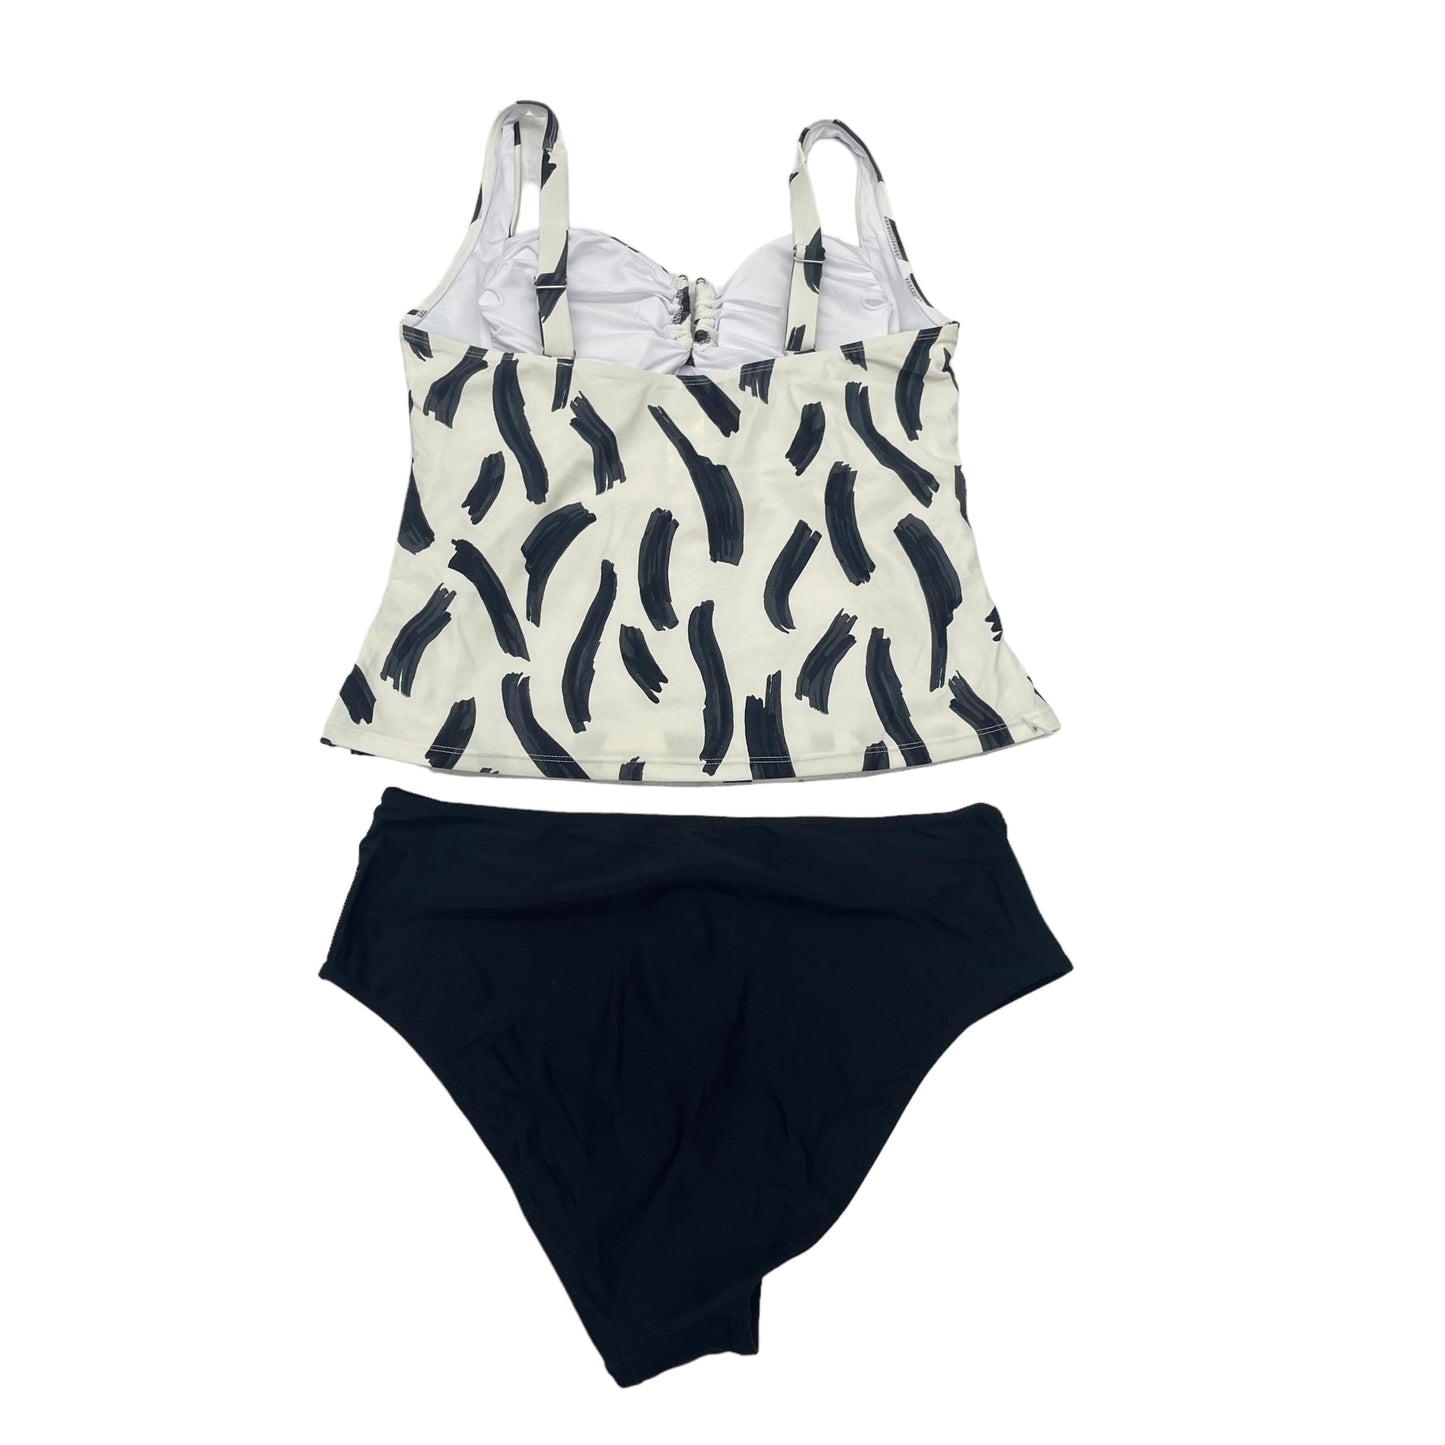 BLACK & WHITE SWIMSUIT 2PC by CUPSHE Size:XL